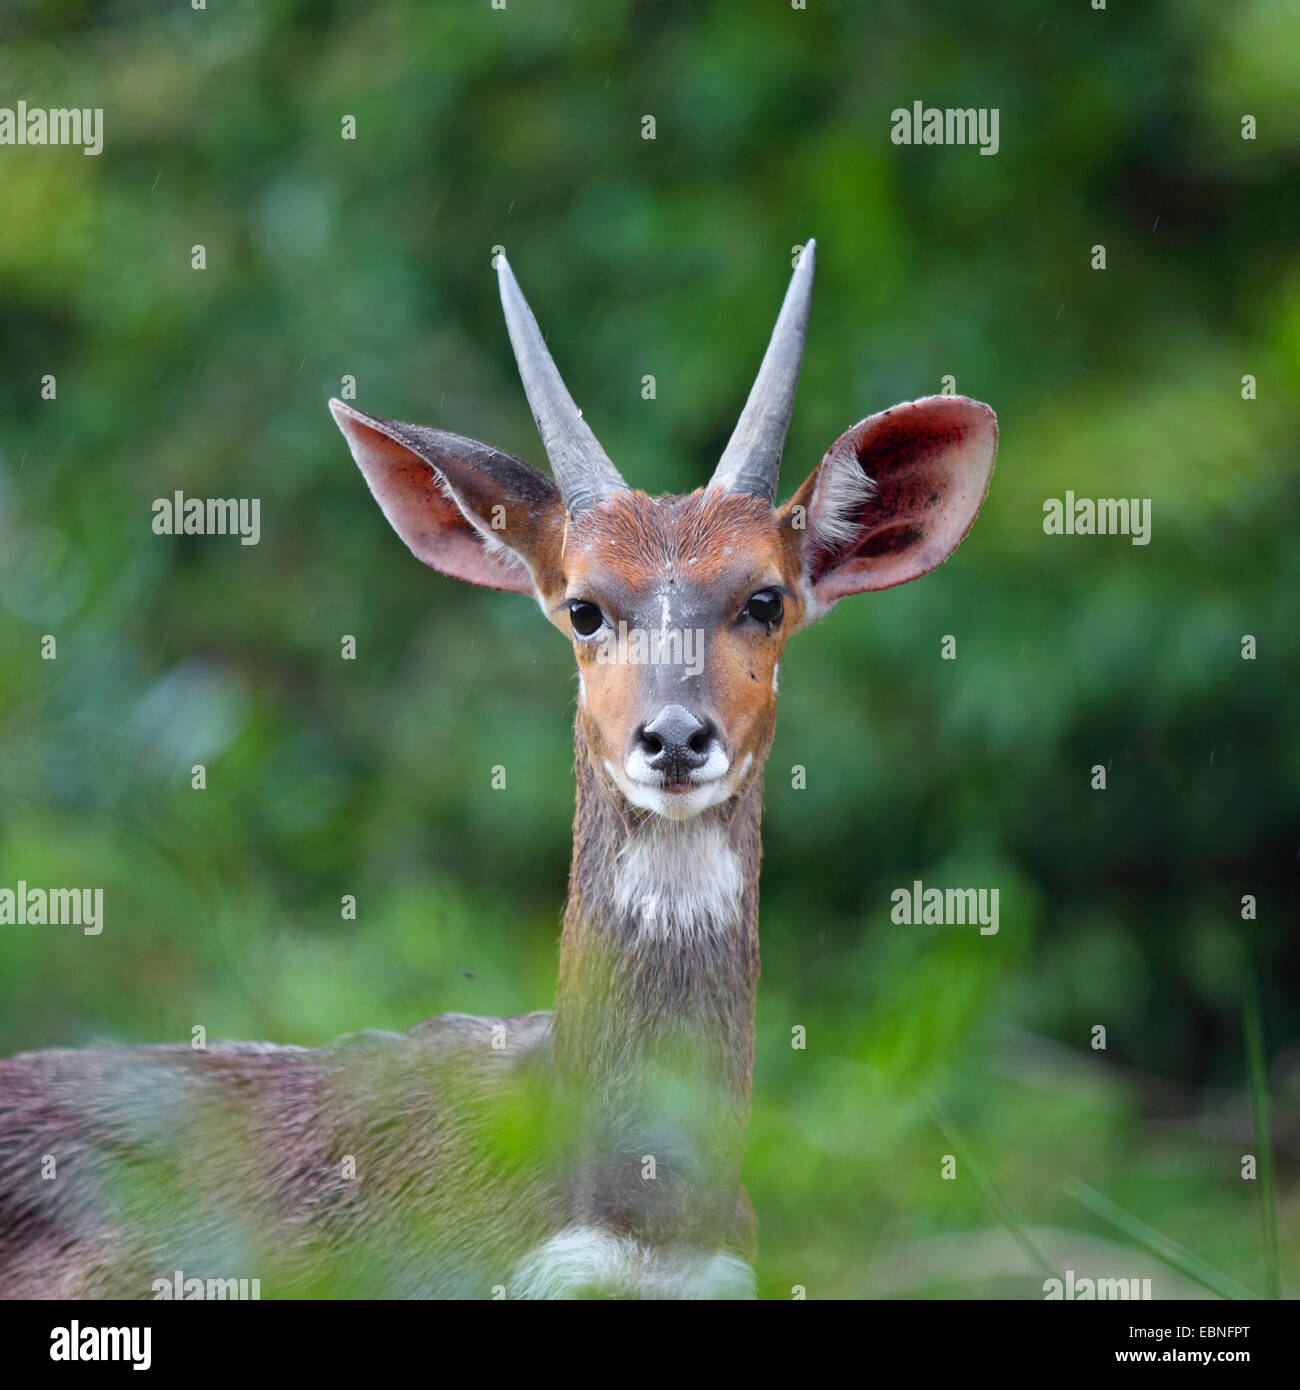 bushbuck, harnessed antelope (Tragelaphus scriptus), portrait of a young male, South Africa, St. Lucia Wetland Park Stock Photo